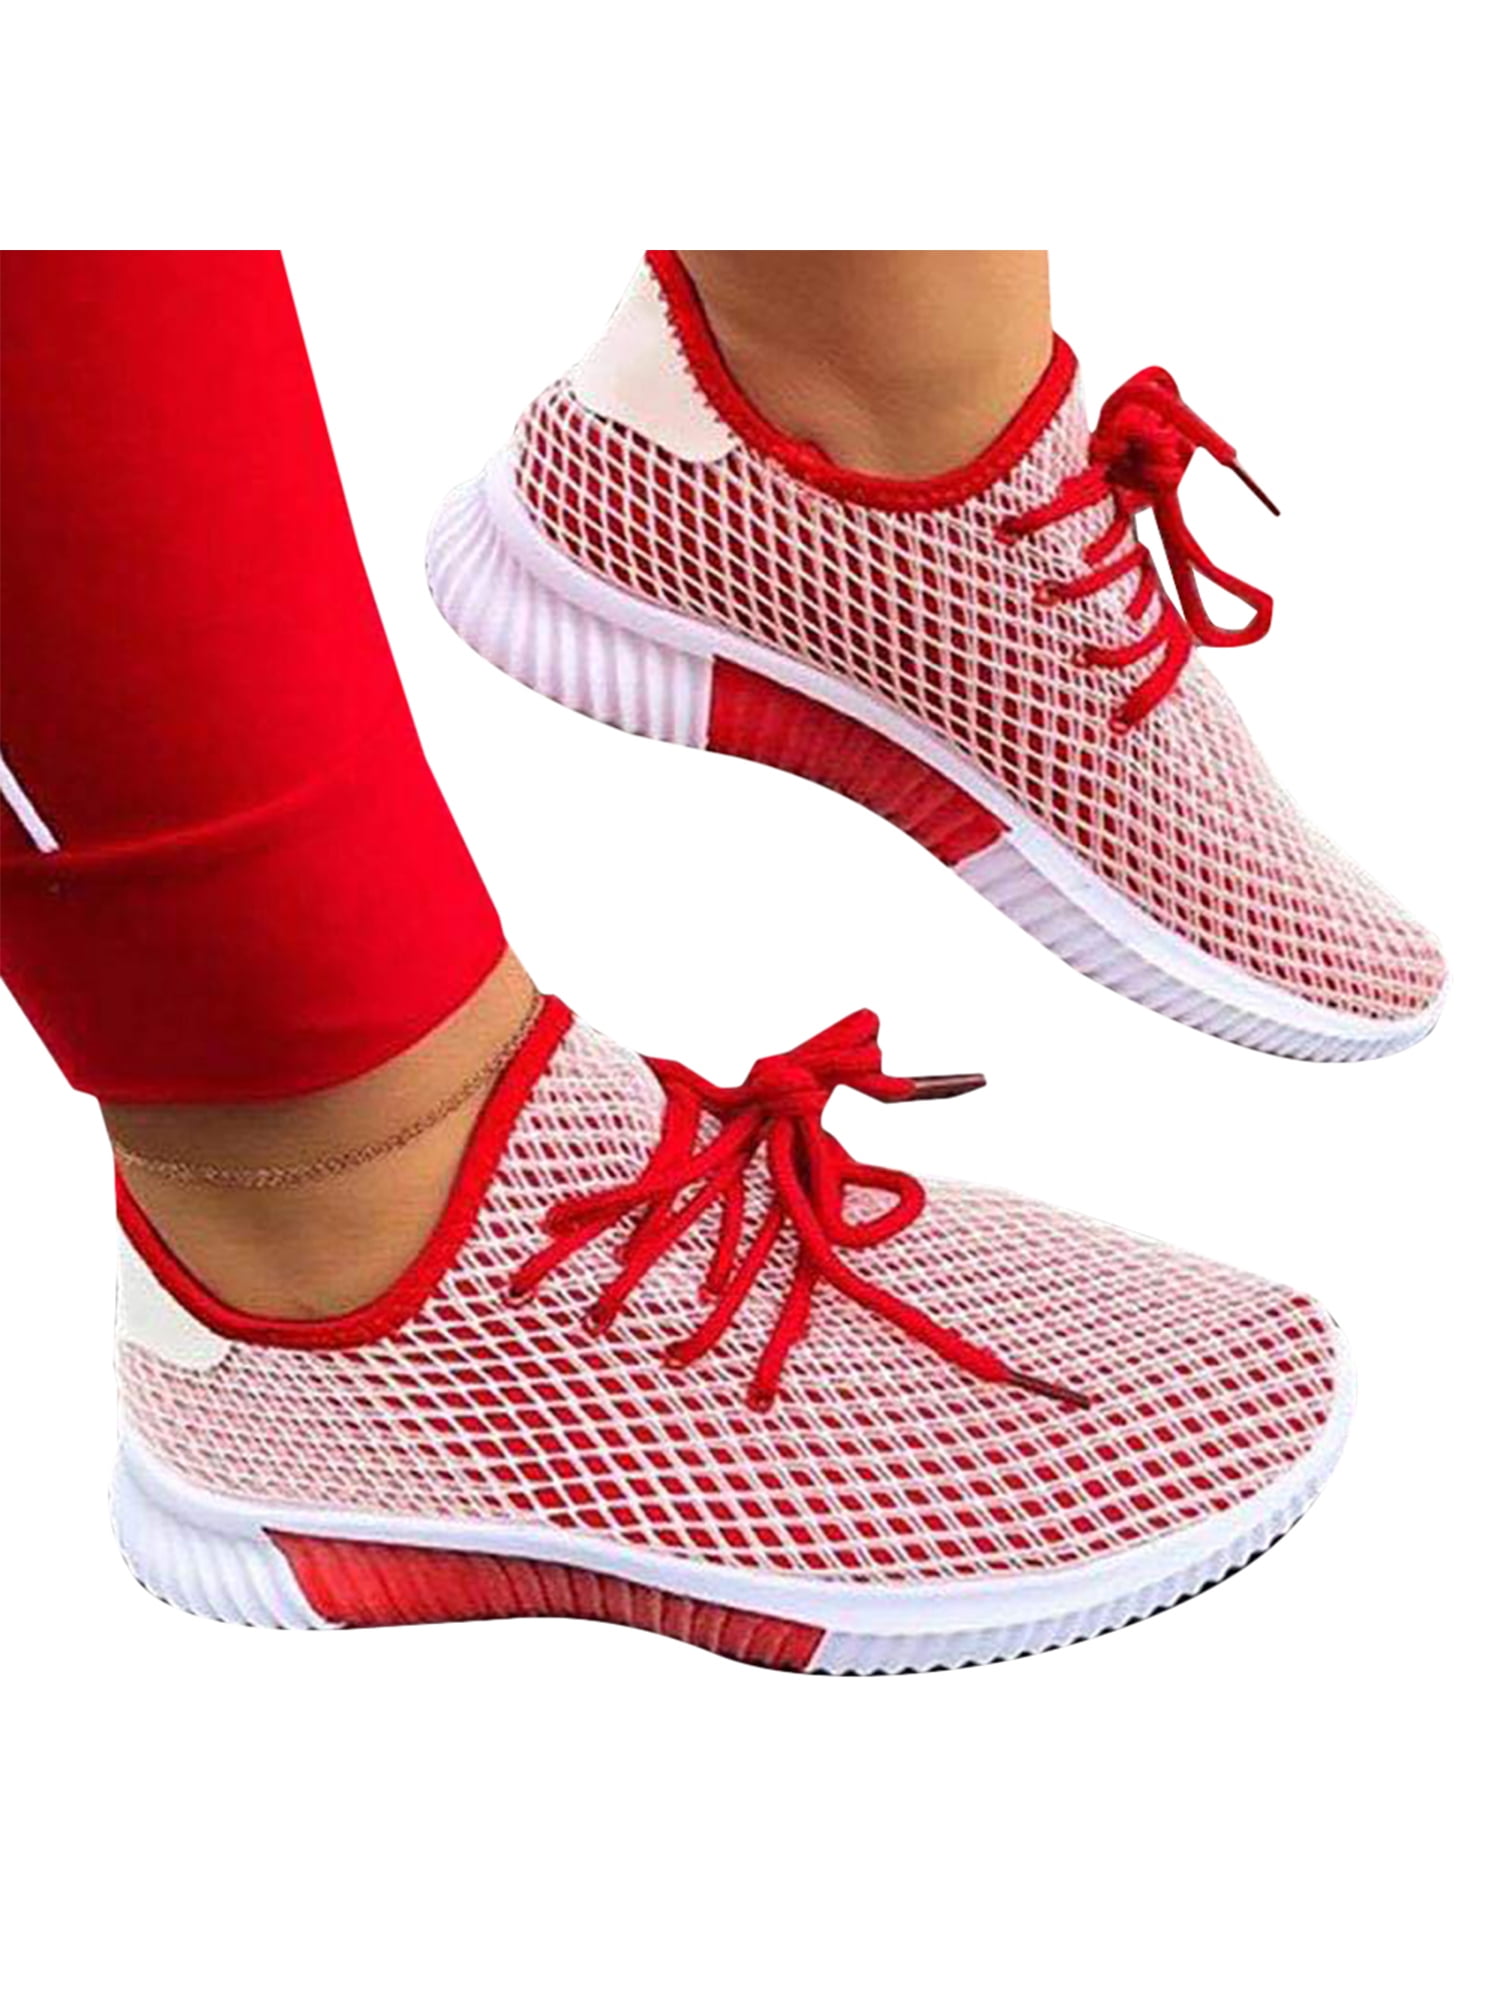 Mens Casual Shoes Hiking Walking Trainers Sports Gym Running Sneakers US Lace Up 